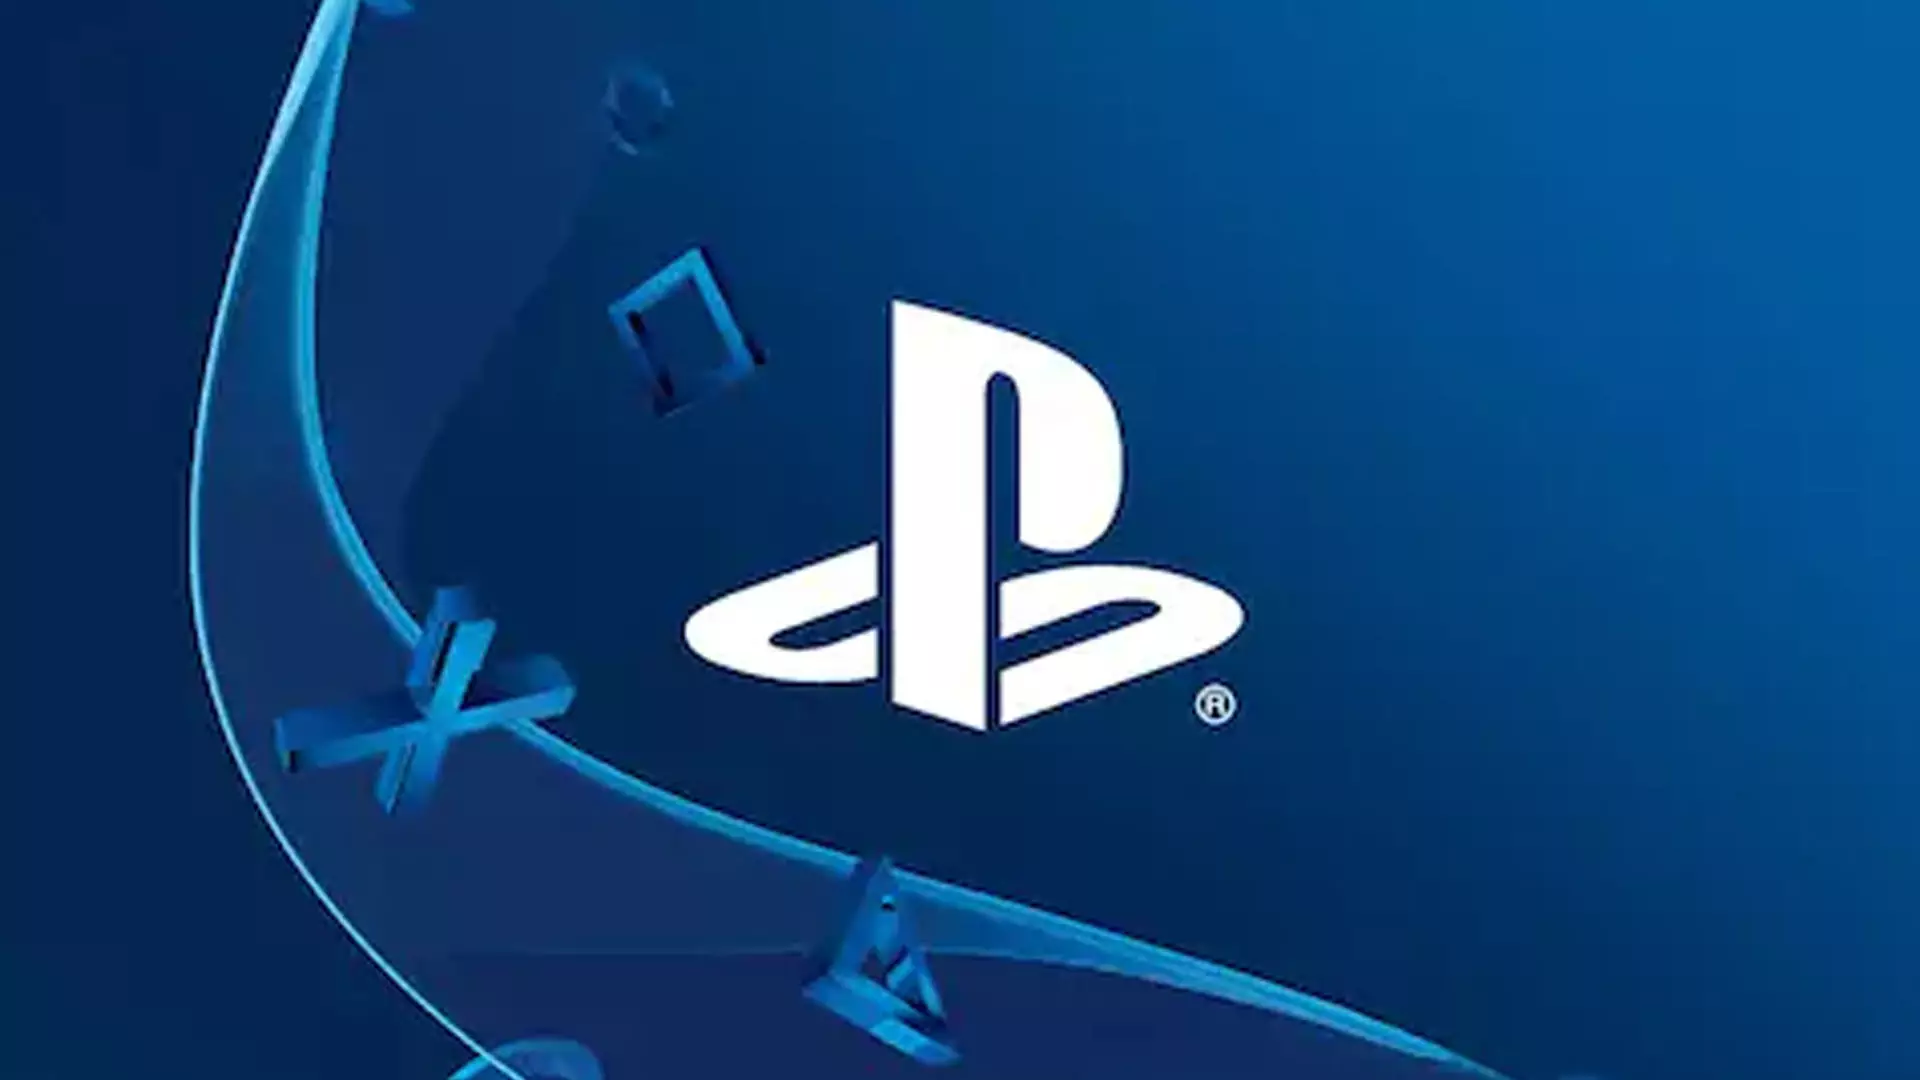 The first details of the PlayStation 5 have been officially revealed